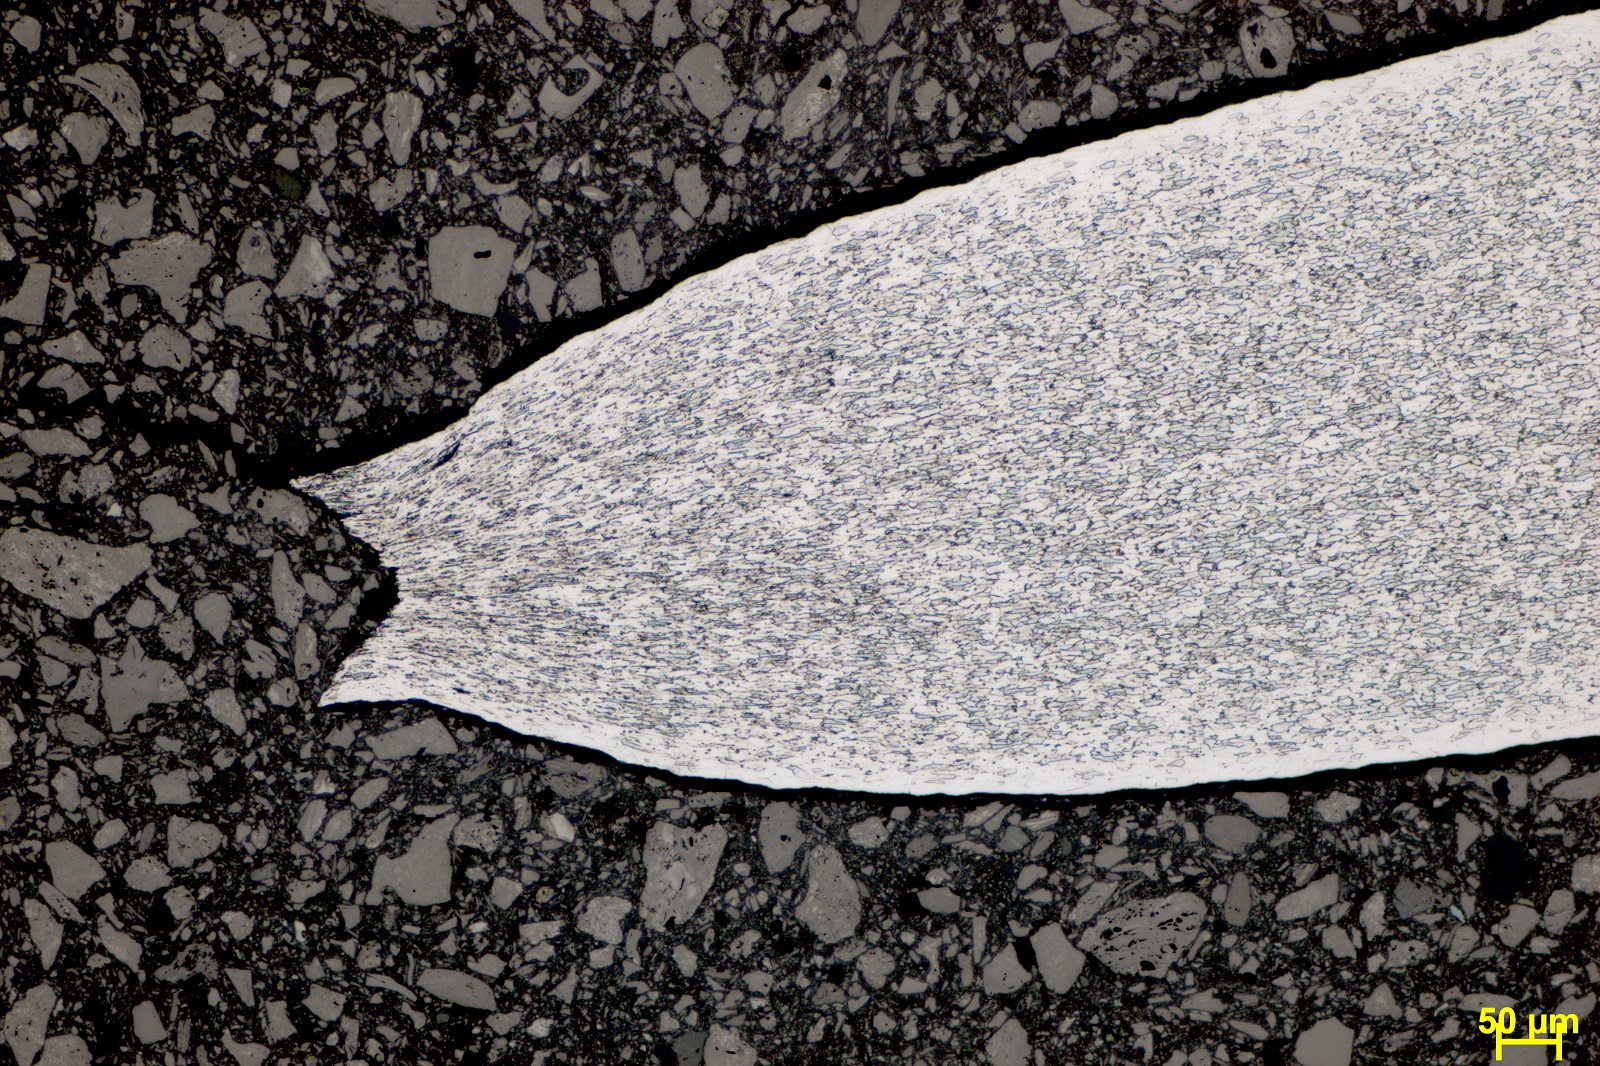 Sectional view of the ductile fracture due to thinning after elongation, imaged using ZEISS Axio Imager 2 optical microscope